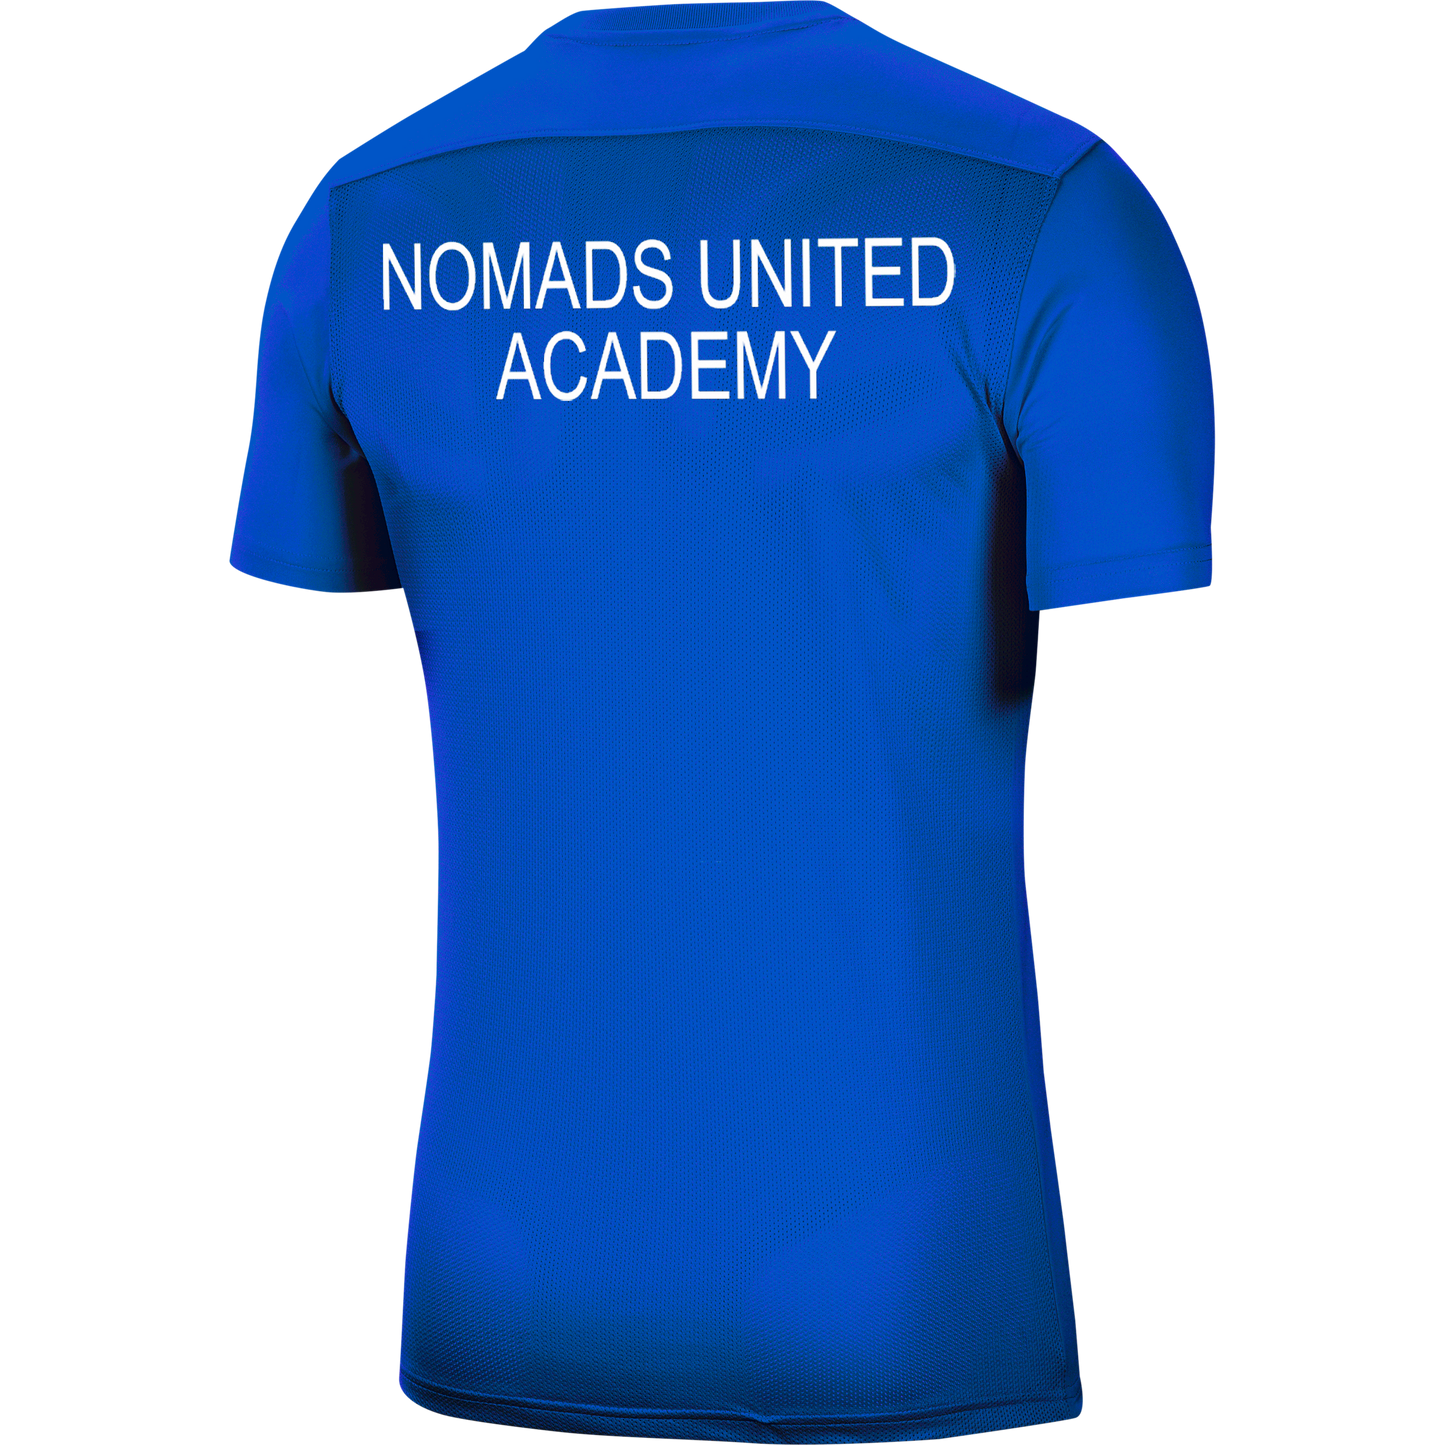 NOMADS UNITED ACADEMY NIKE PARK VII HOME JERSEY - WOMEN'S